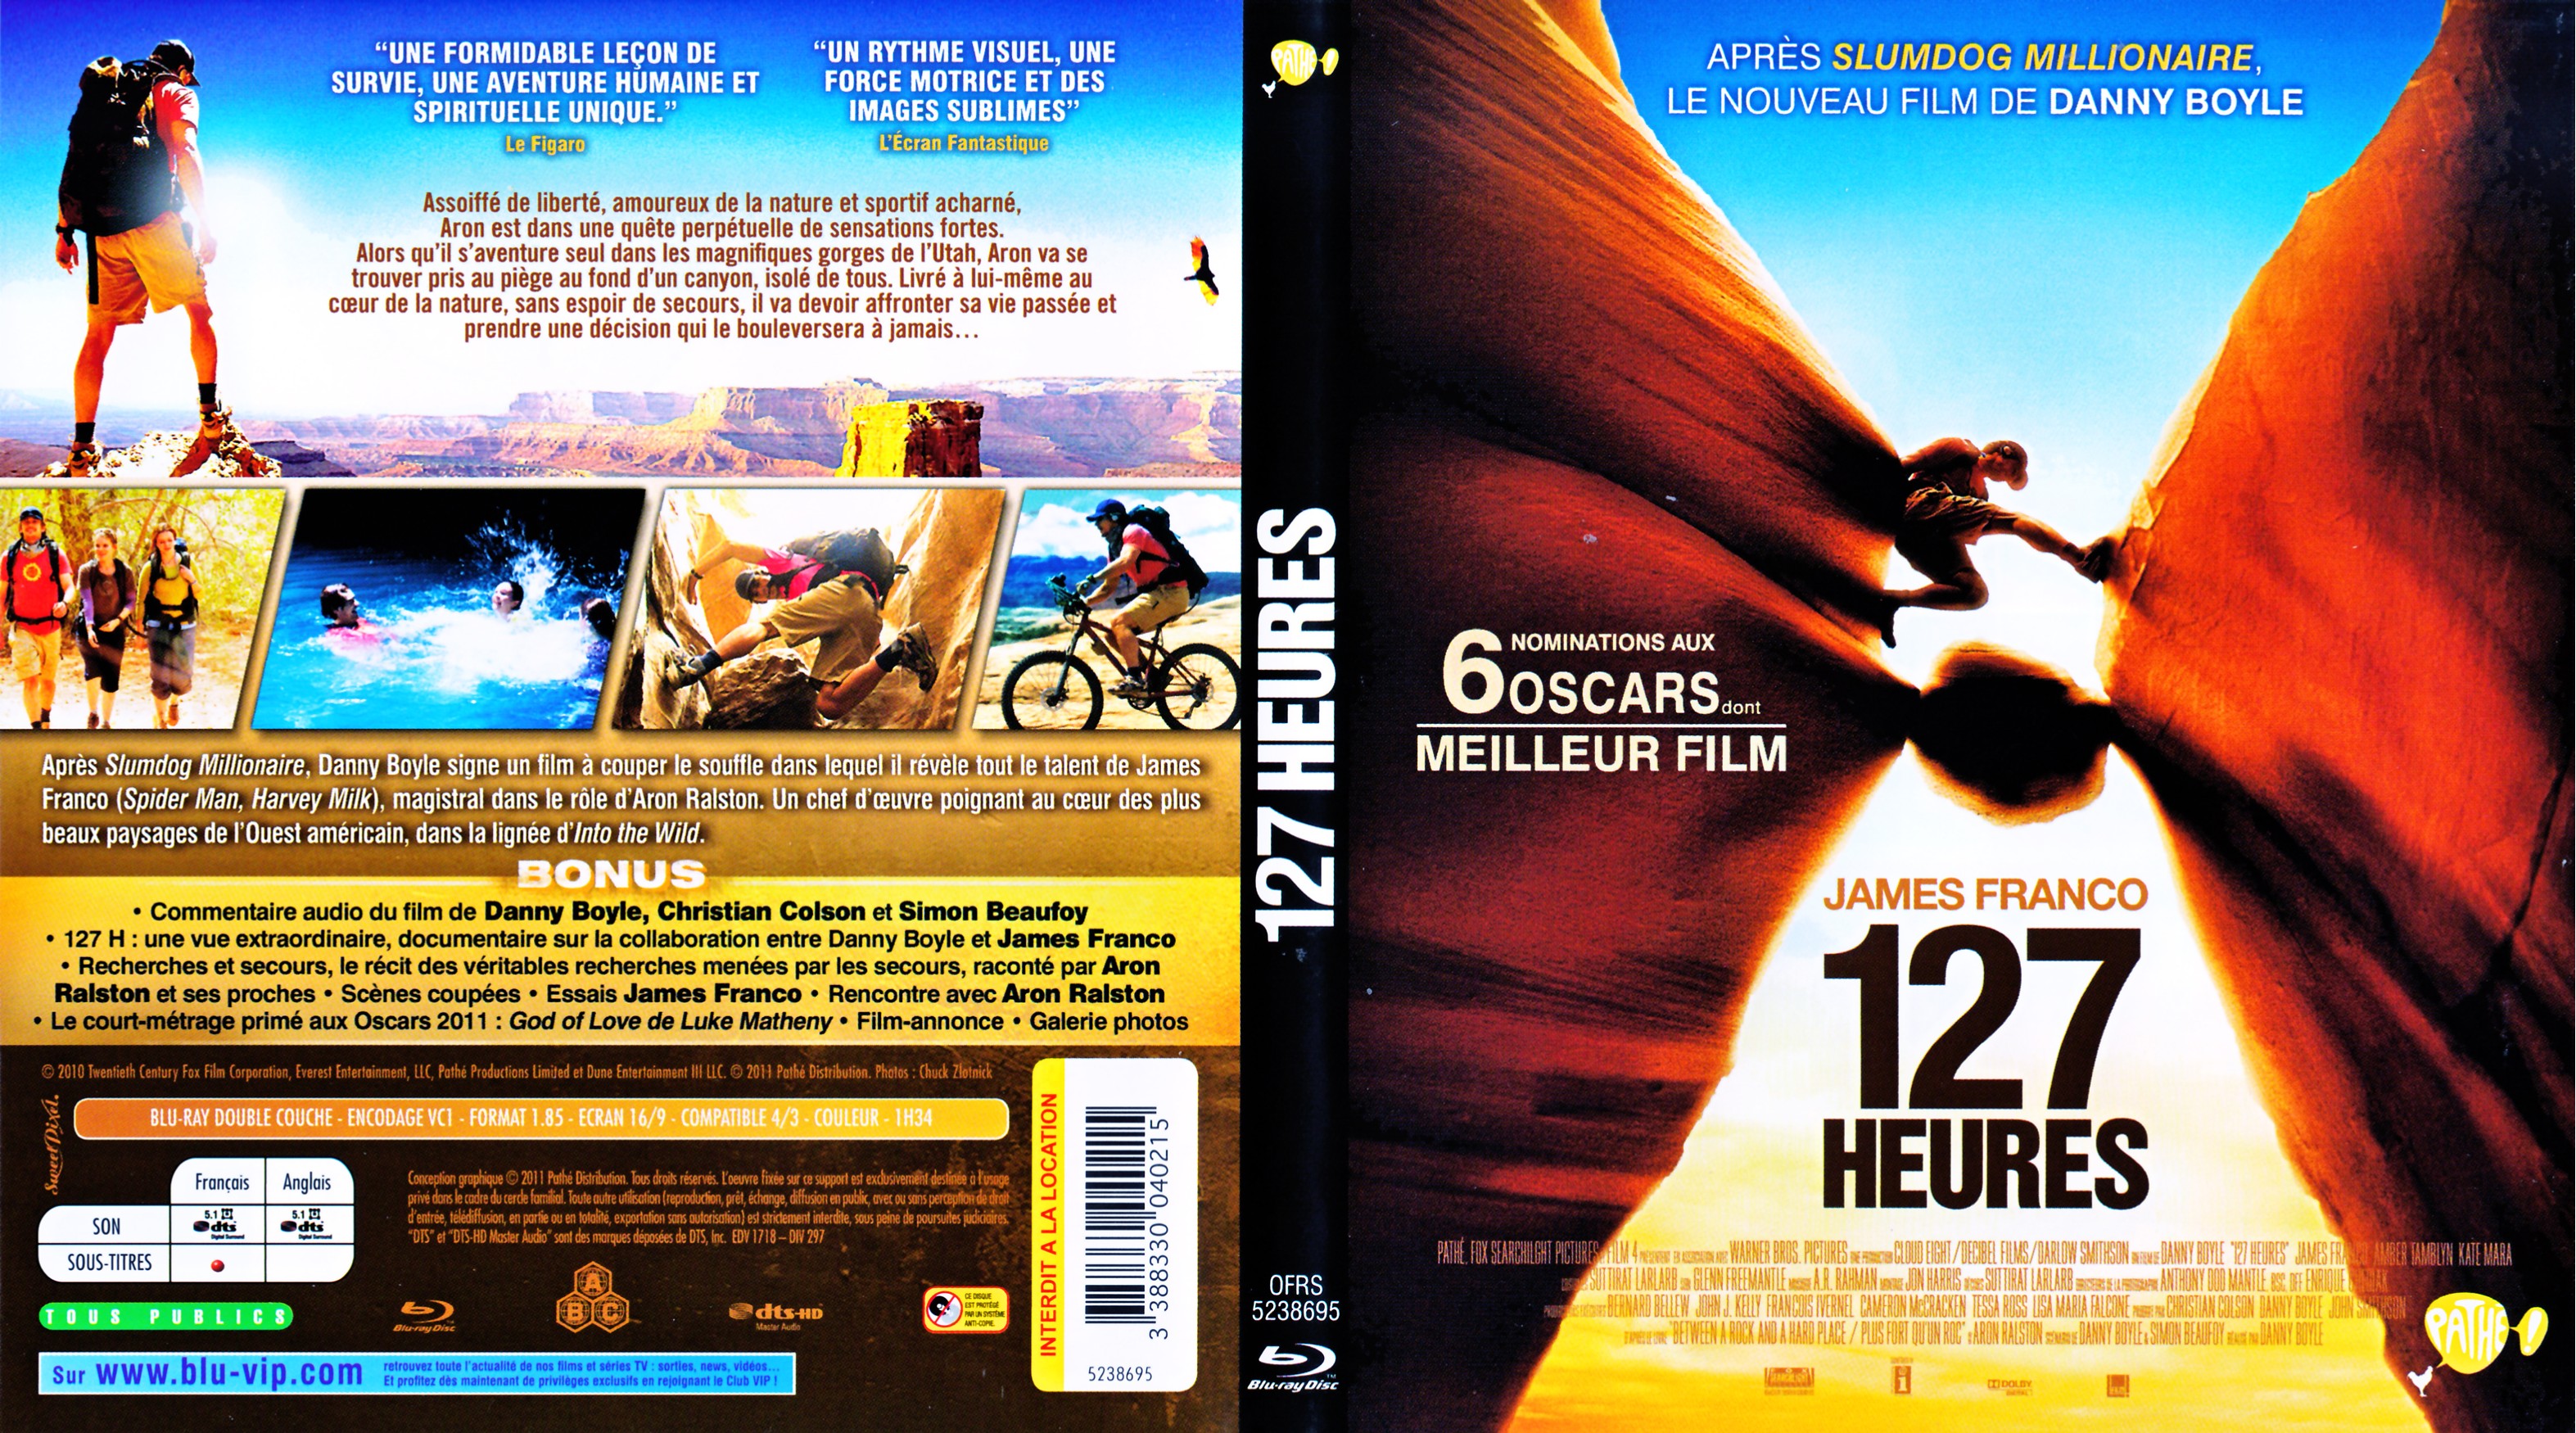 Jaquette DVD 127 heures (BLU-RAY)